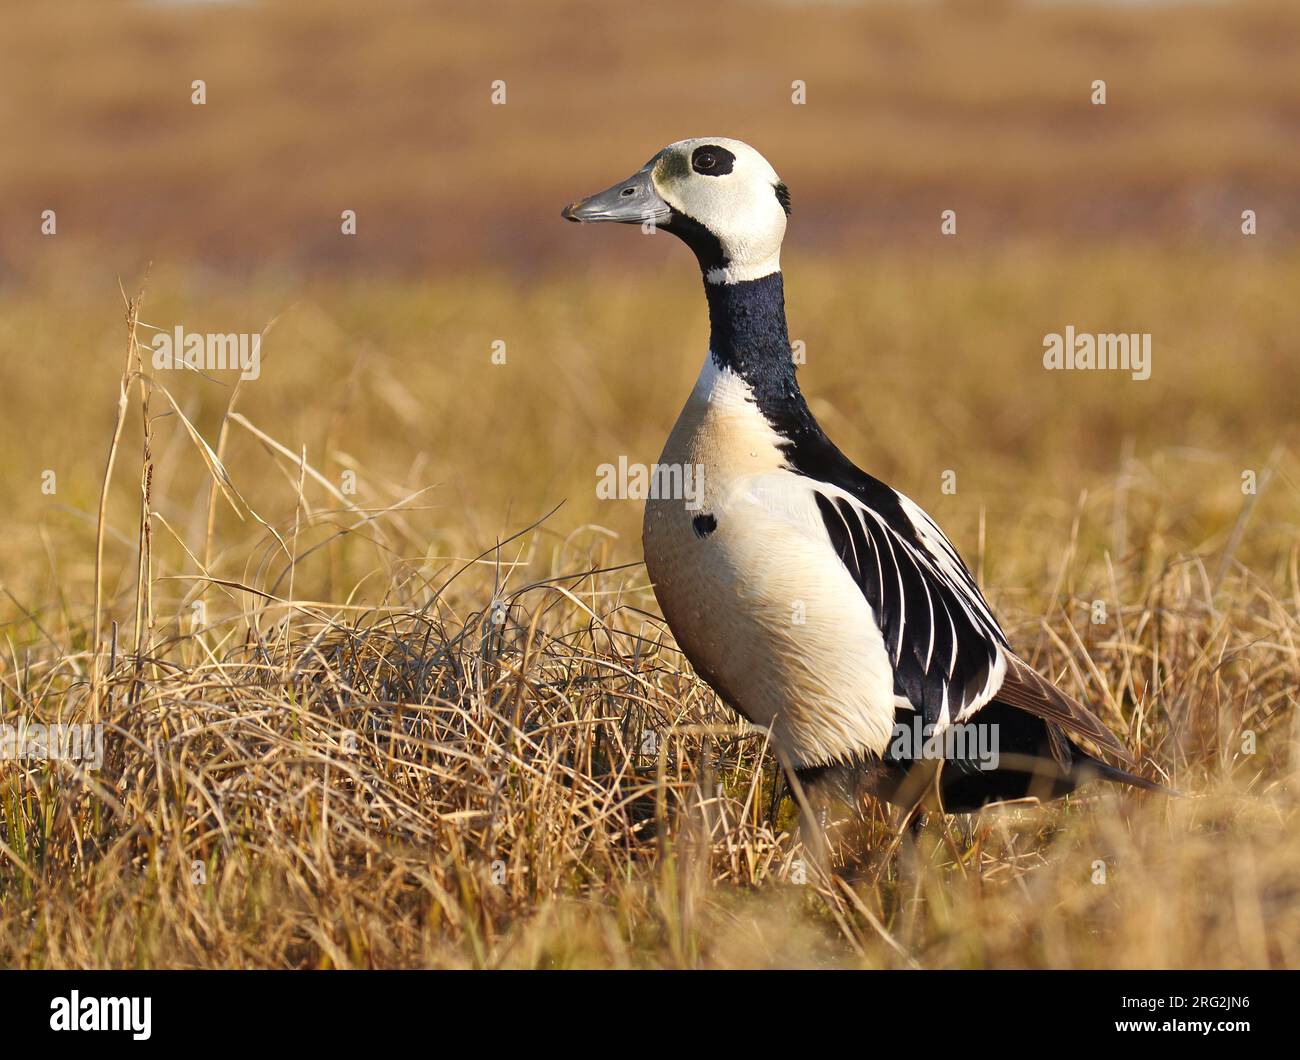 Adult Steller's Eider (Polysticta stelleri) at the breeding area during arctic spring in Alaska, United States. Standing in tall grass. Stock Photo